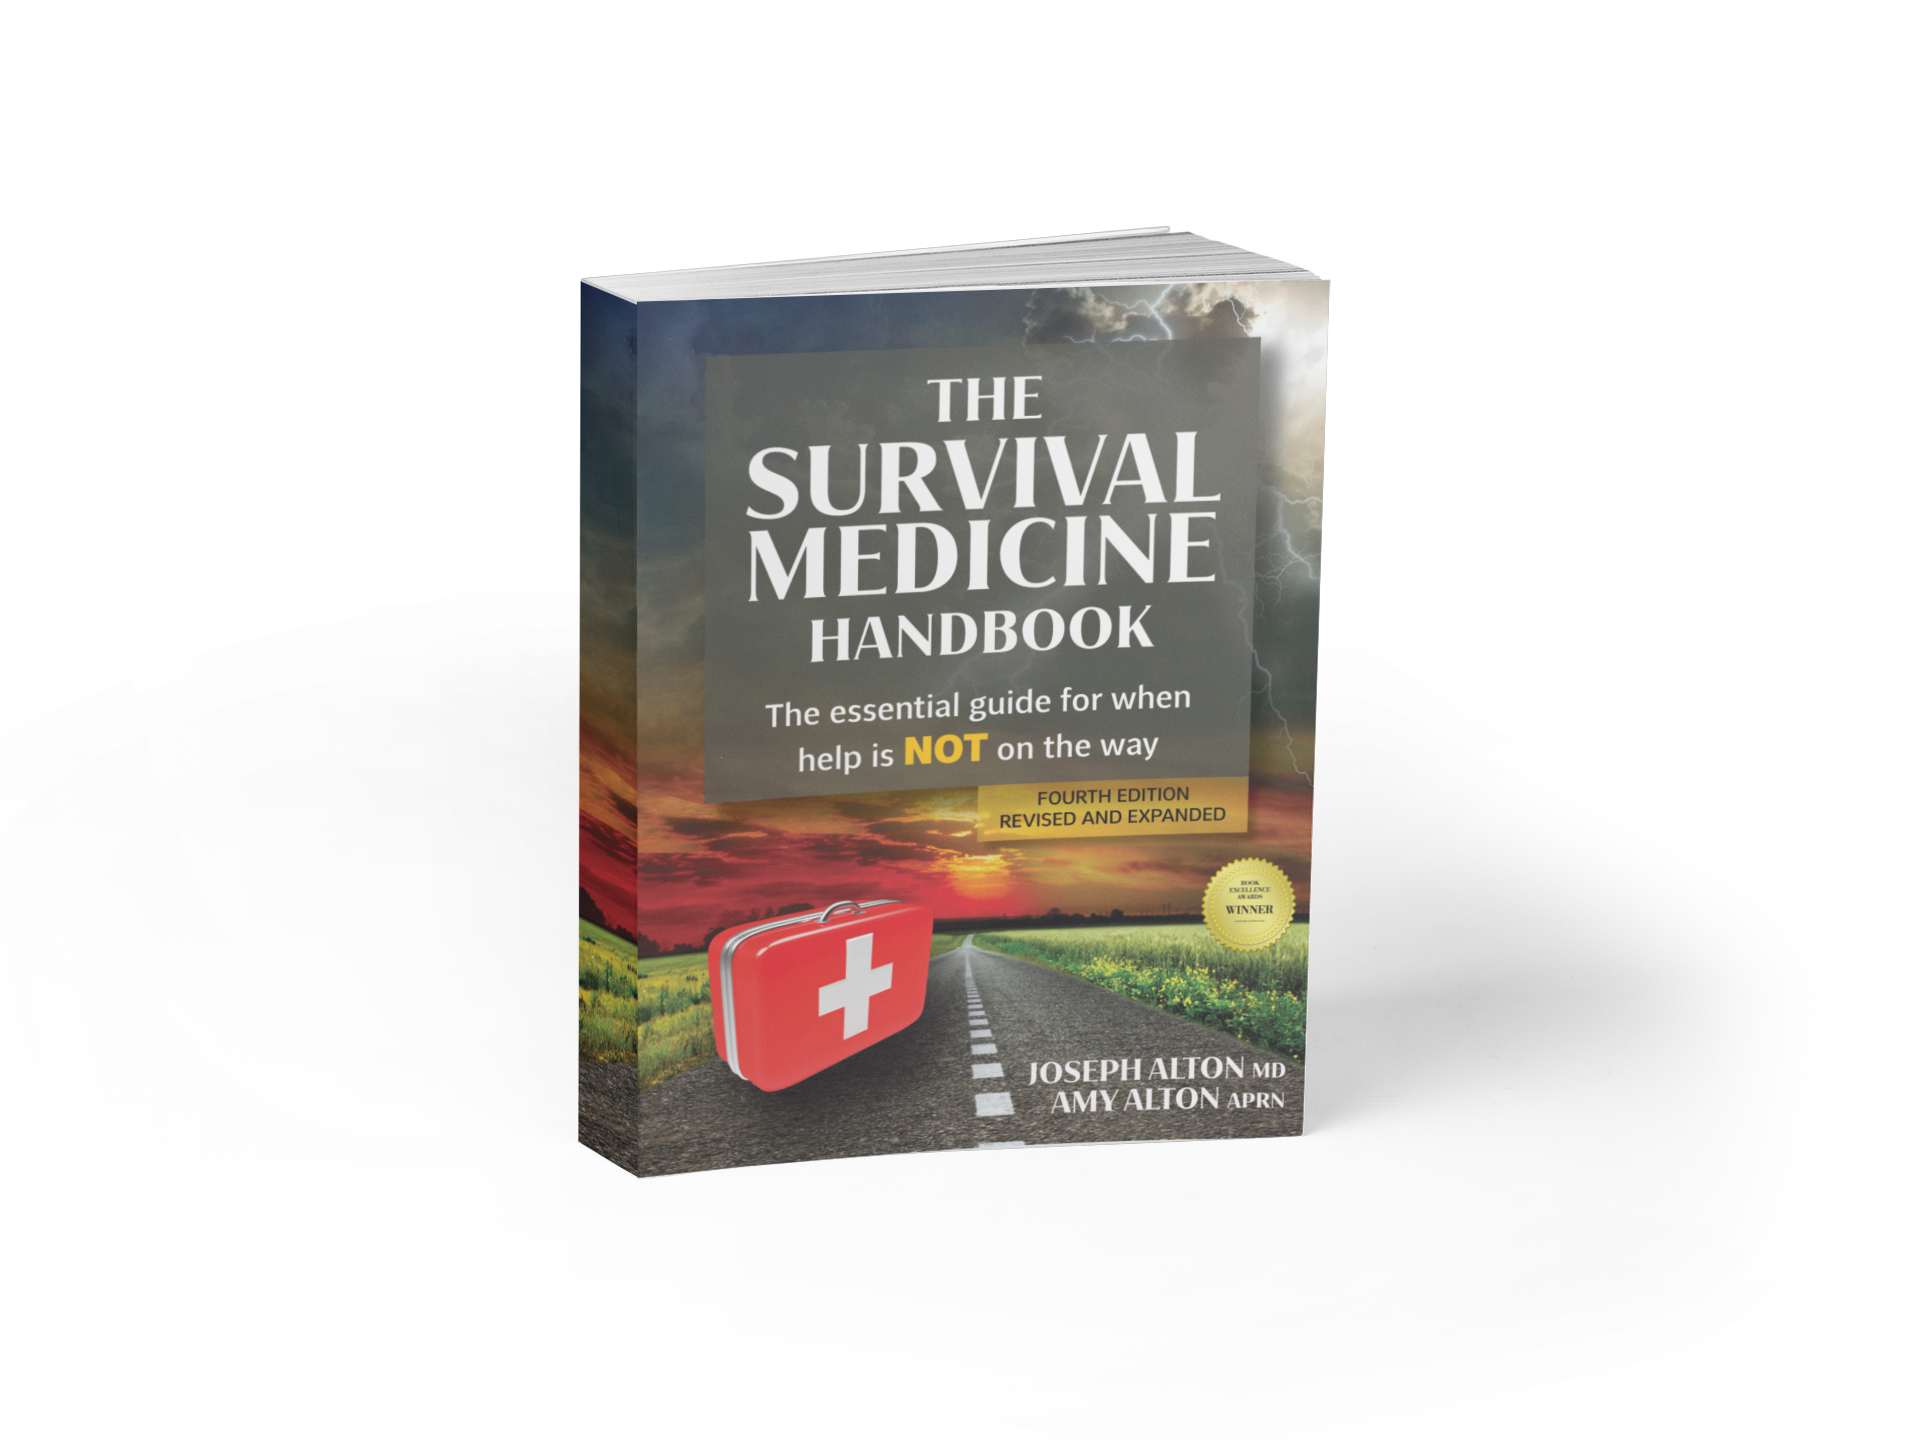 The Survival Medicine Handbook: The Essential Guide For When Help is Not On The Way Wins Top Prize in 2022 Book Excellence Awards